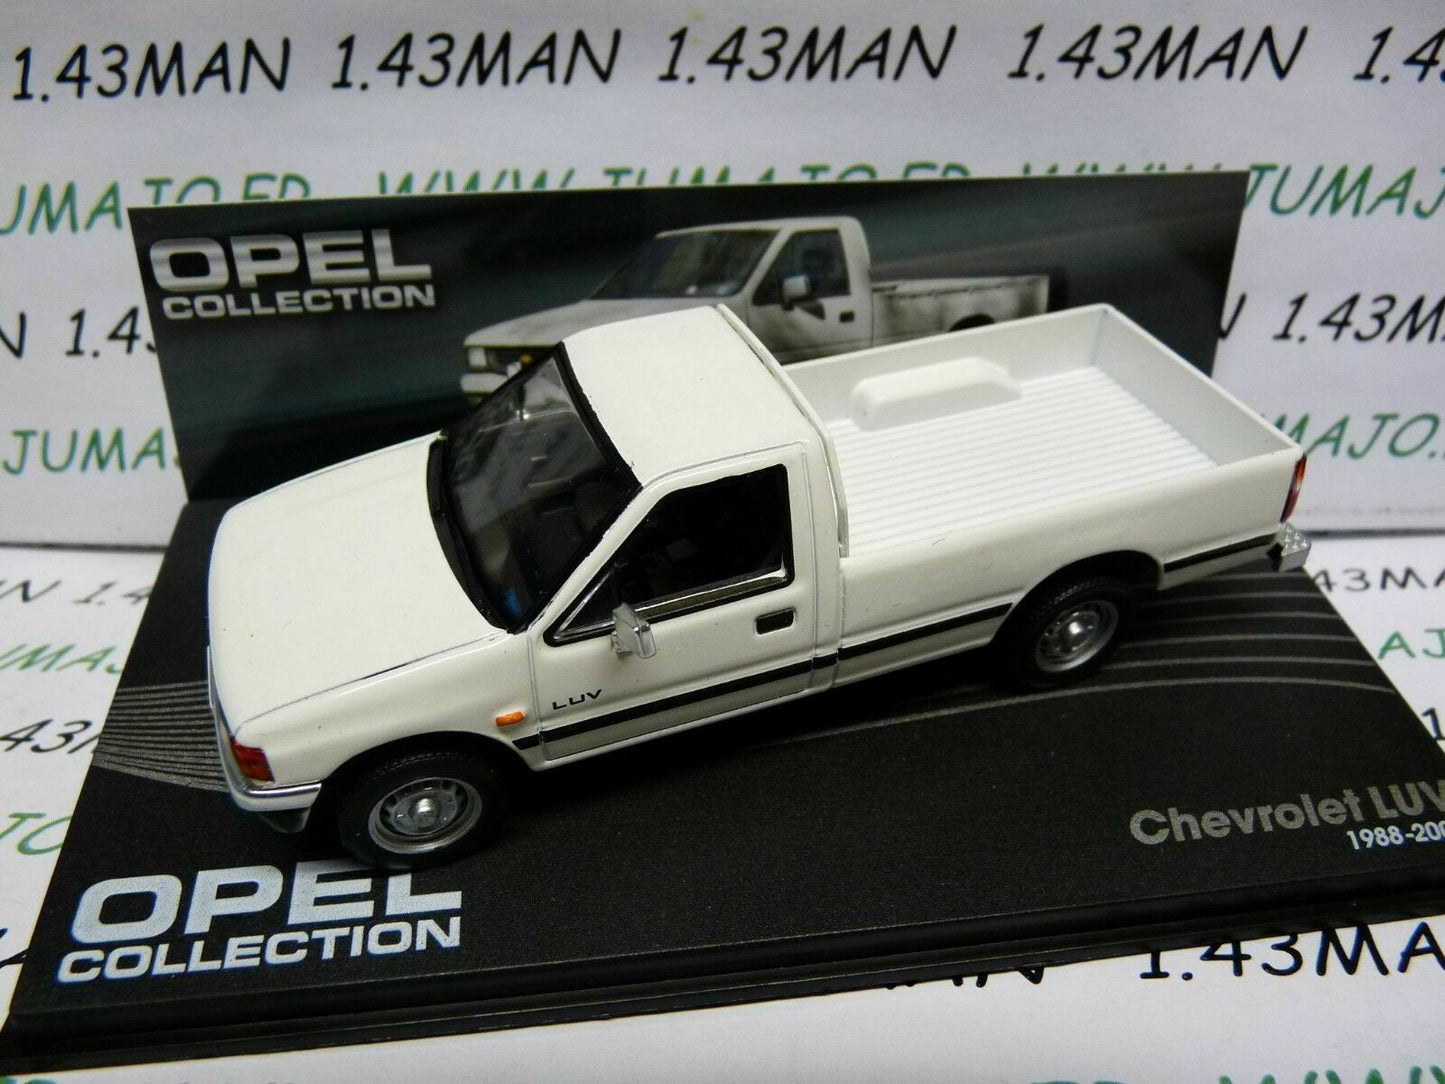 OPE39 voiture 1/43 IXO eagle moss OPEL collection : Chevrolet LUV